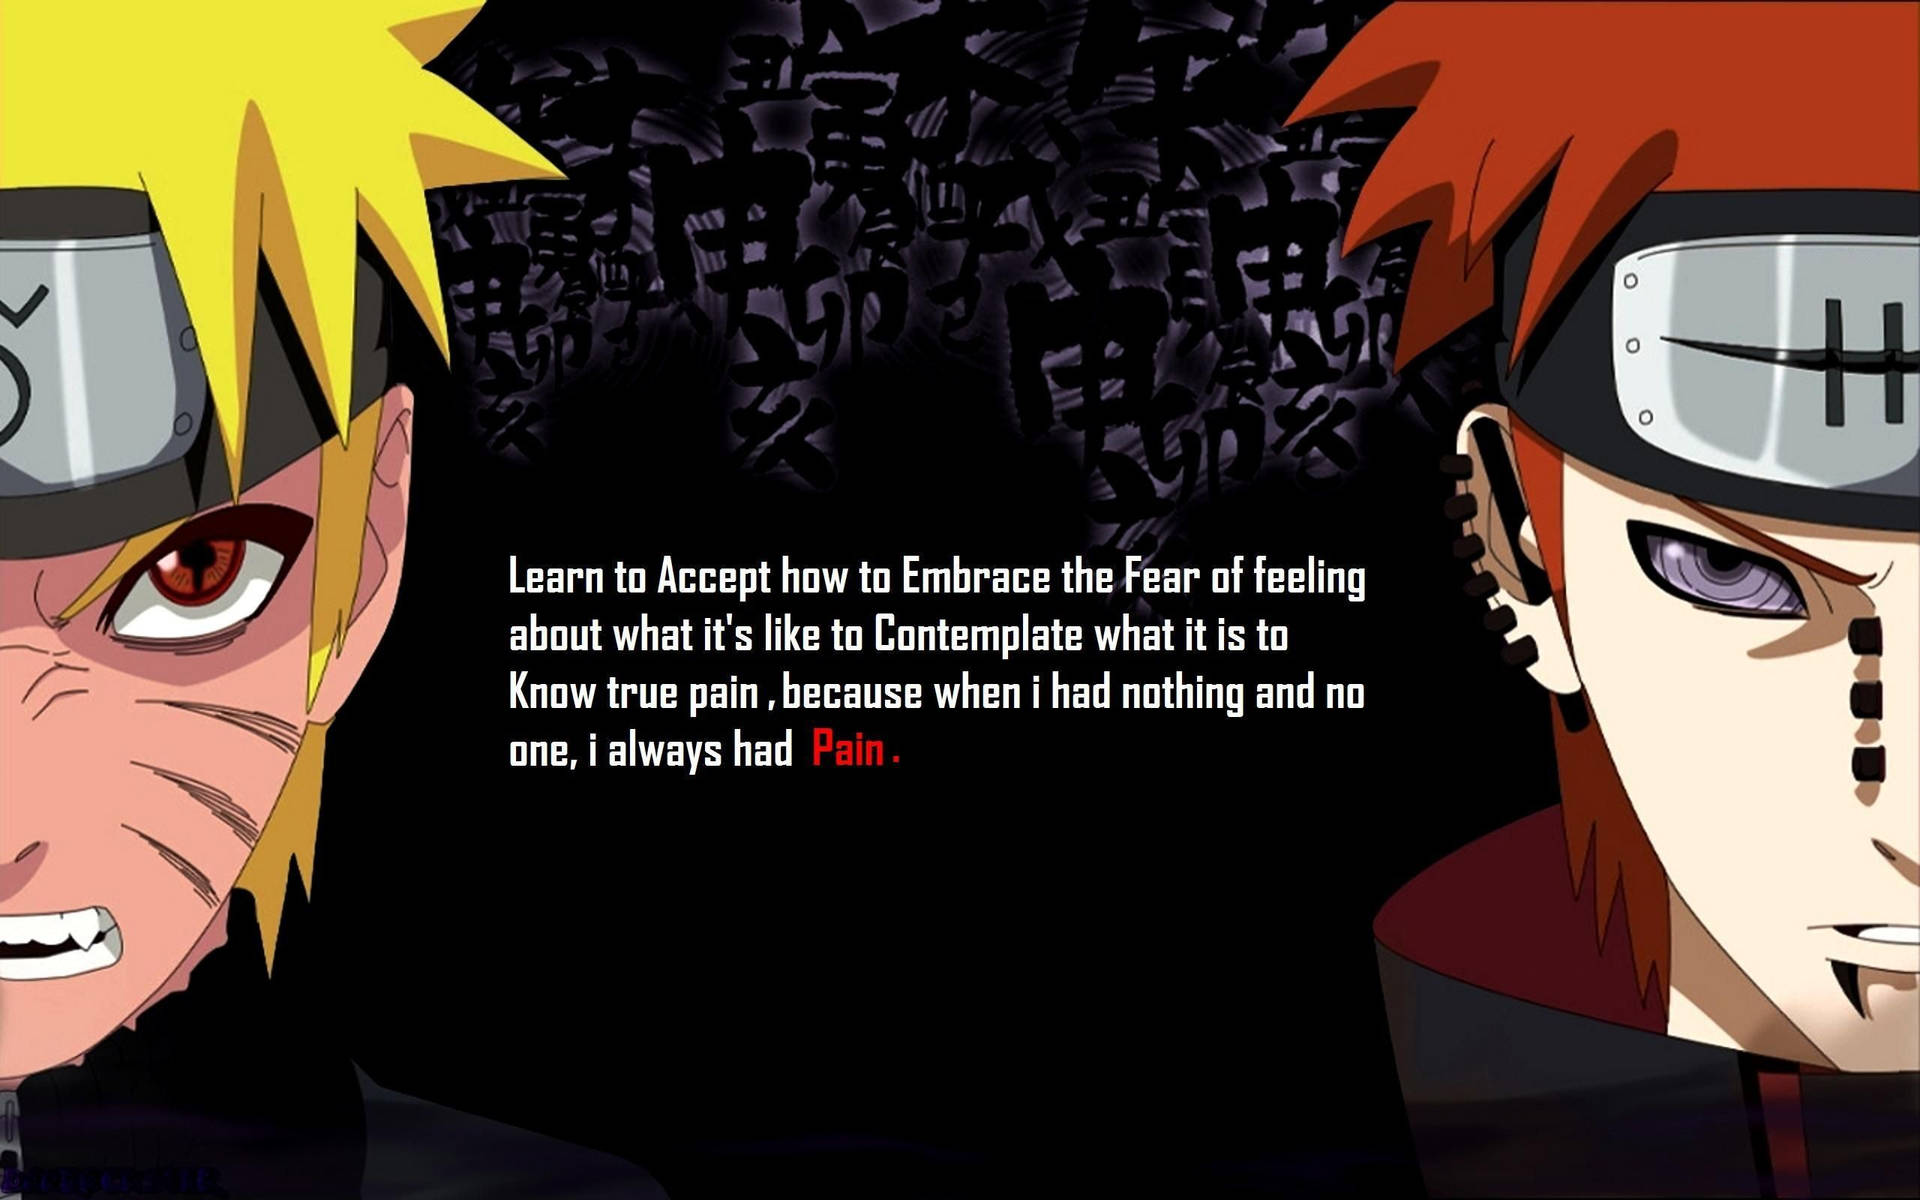 Embracing Life's Challenges - Naruto's Perspective On Pain